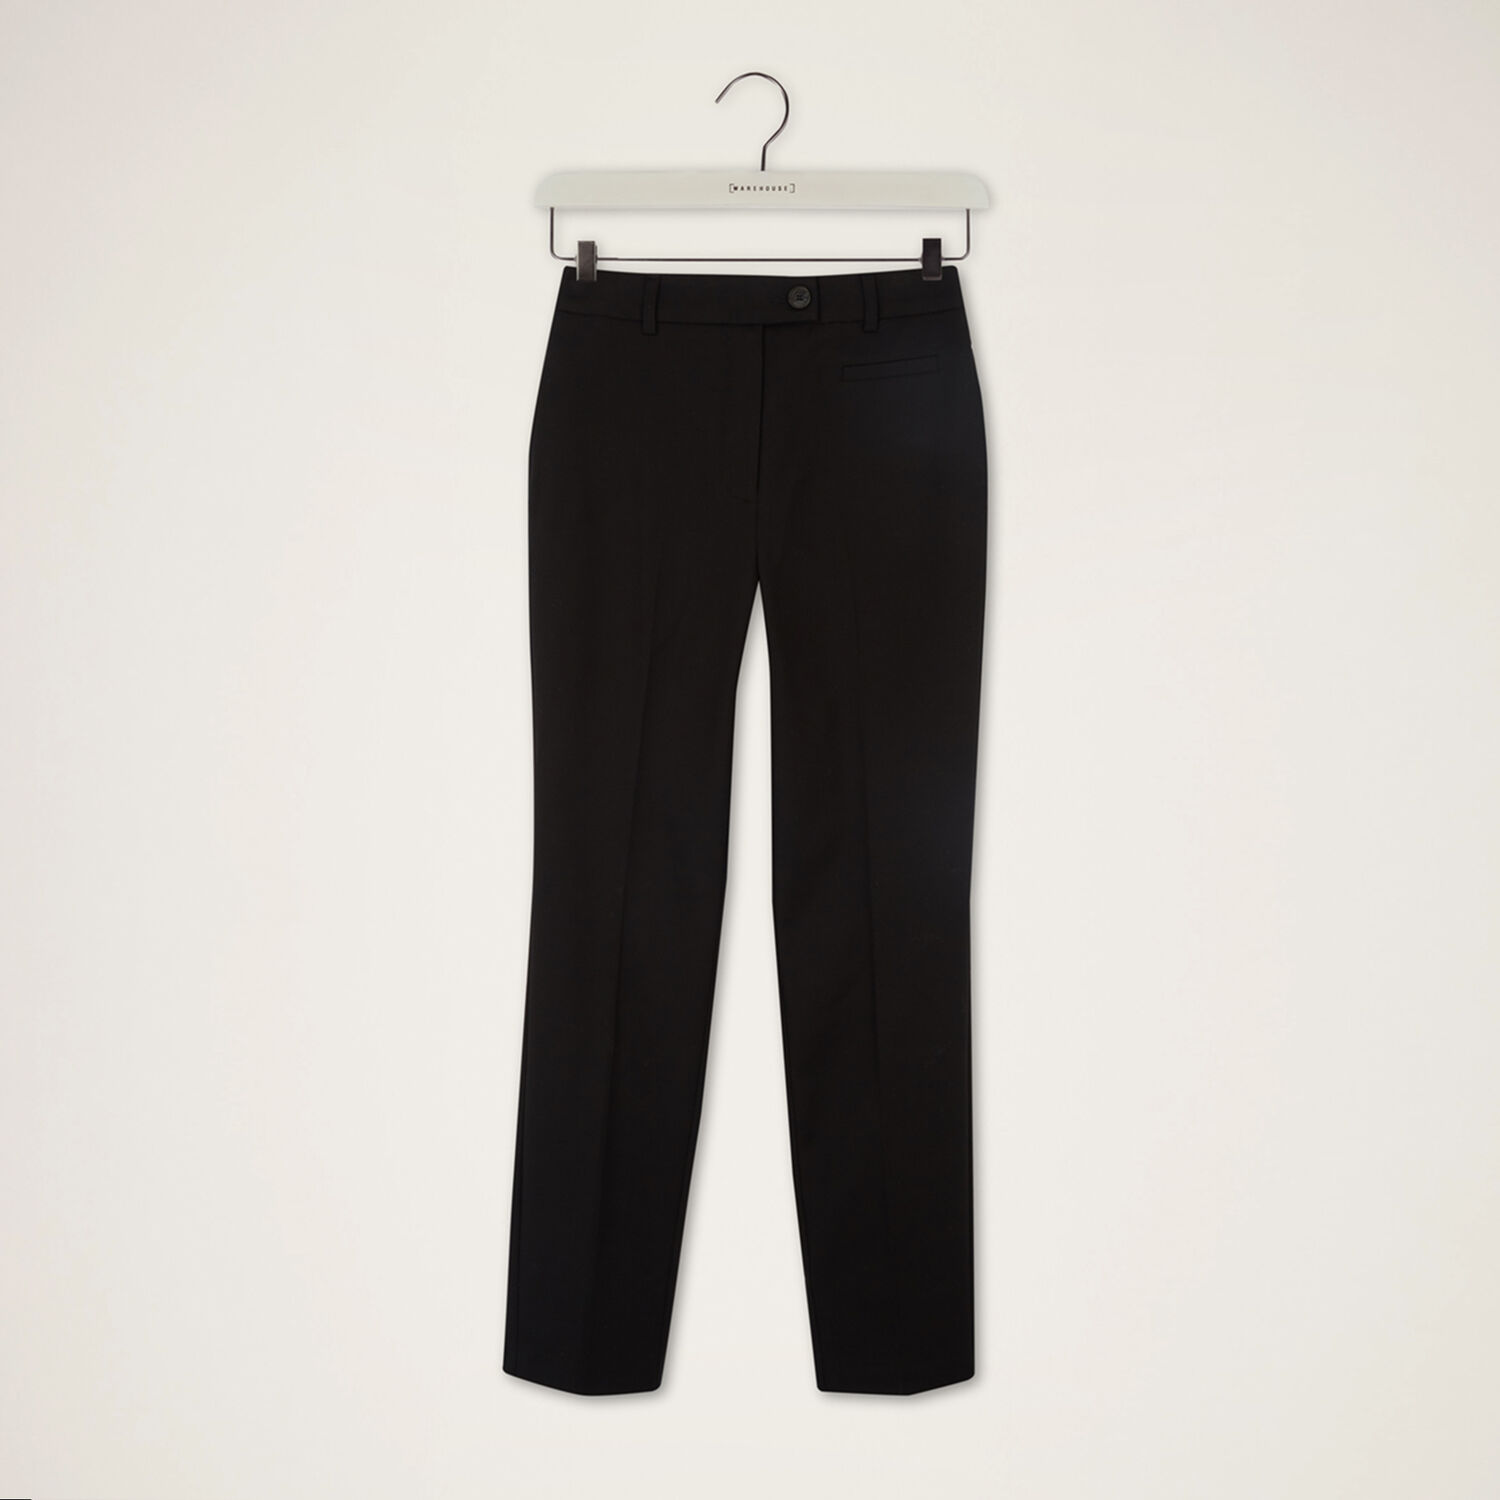 COMPACT COTTON TROUSERS - Hello! We are wt+